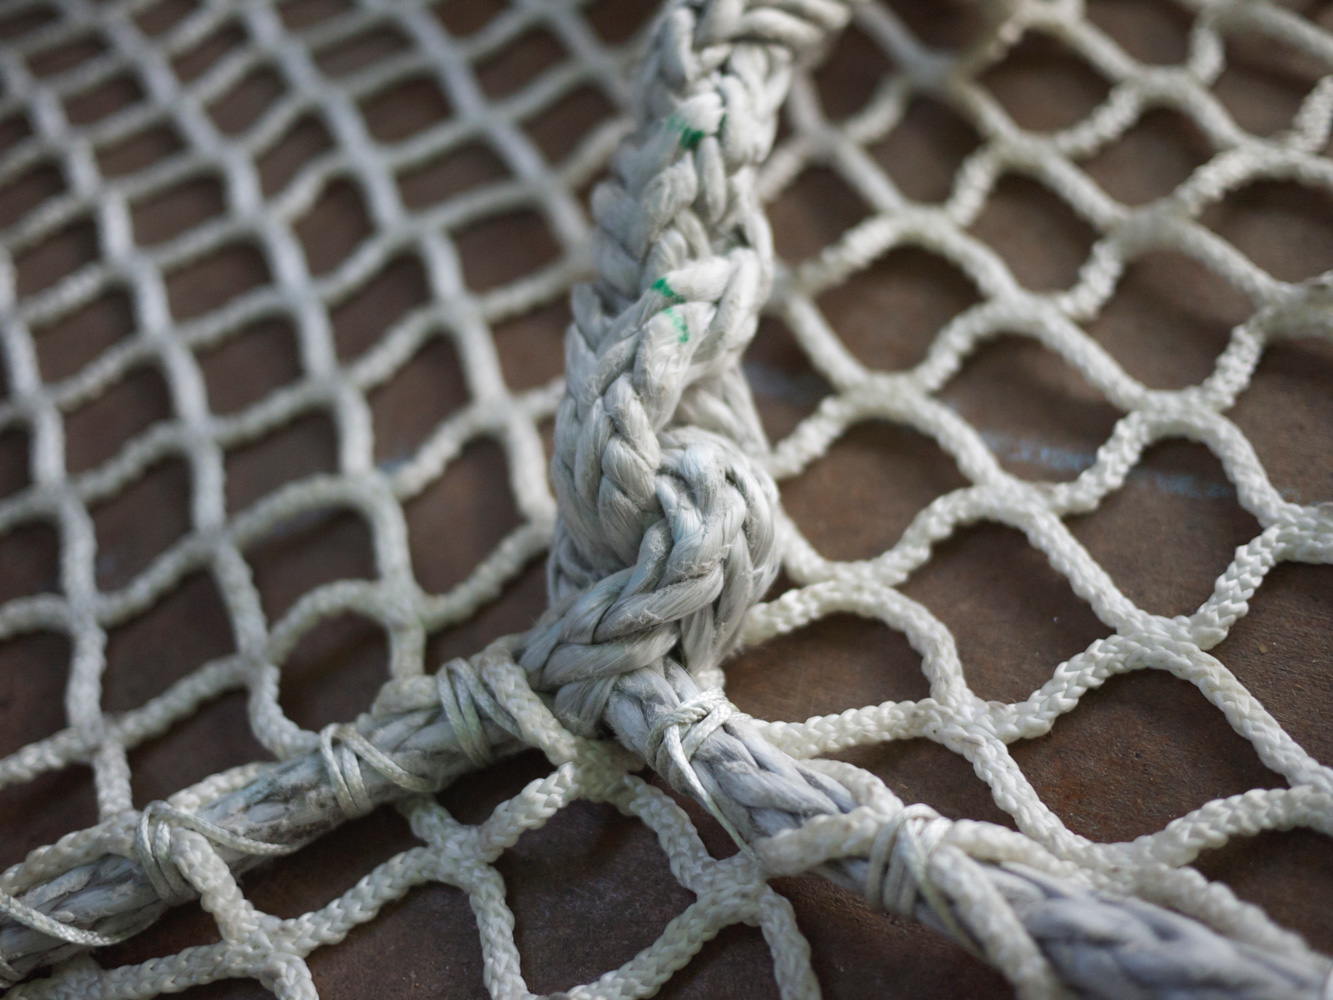 Hand constructed nets